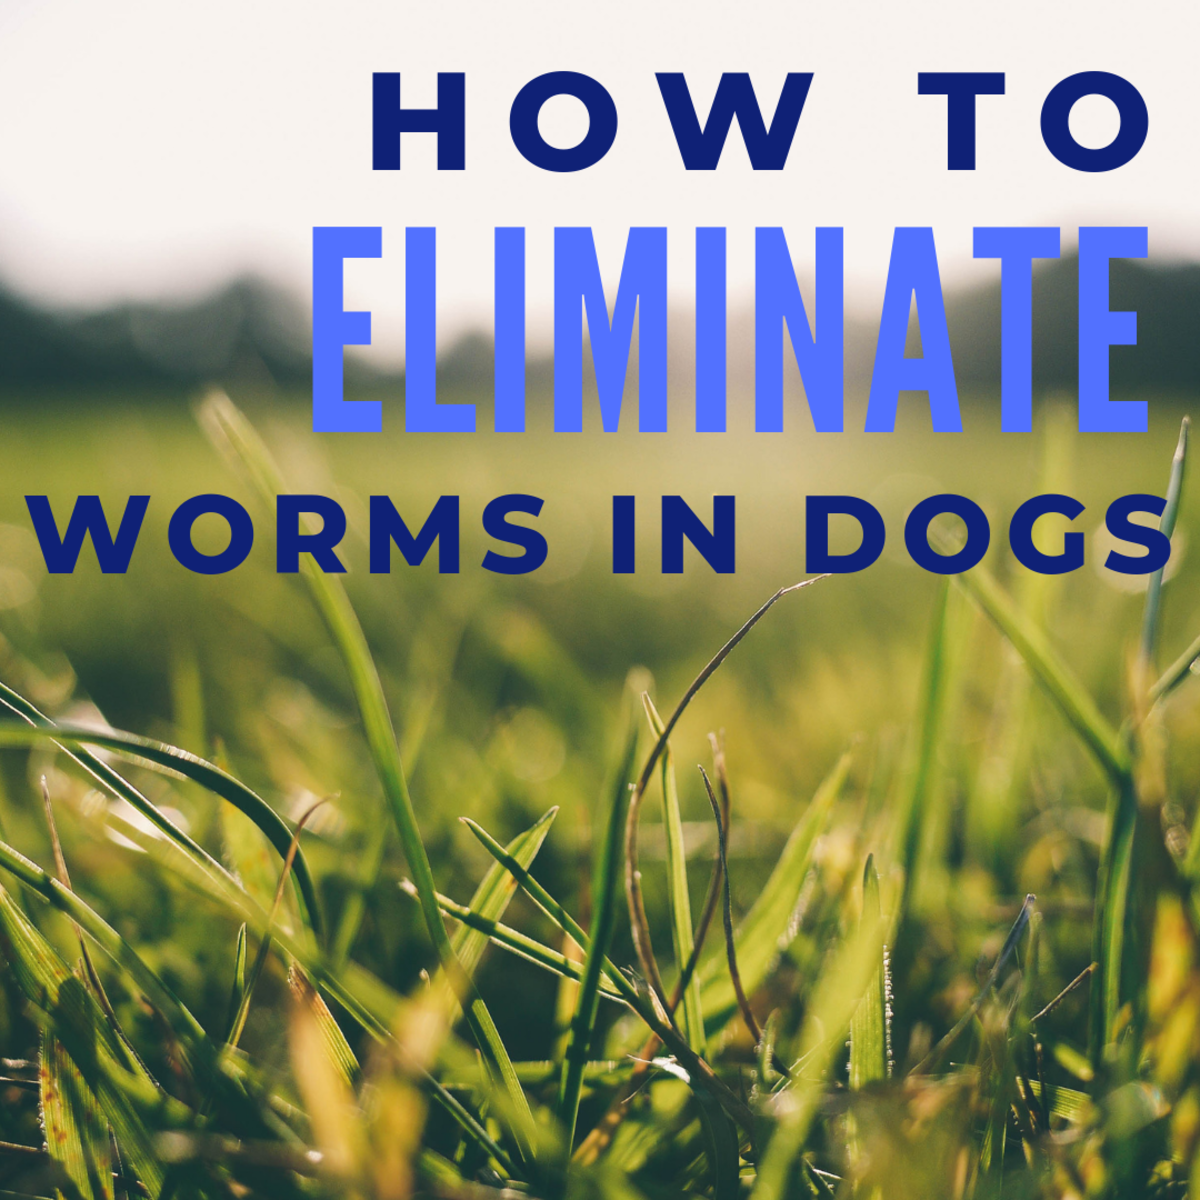 How to eliminate worms in dogs.